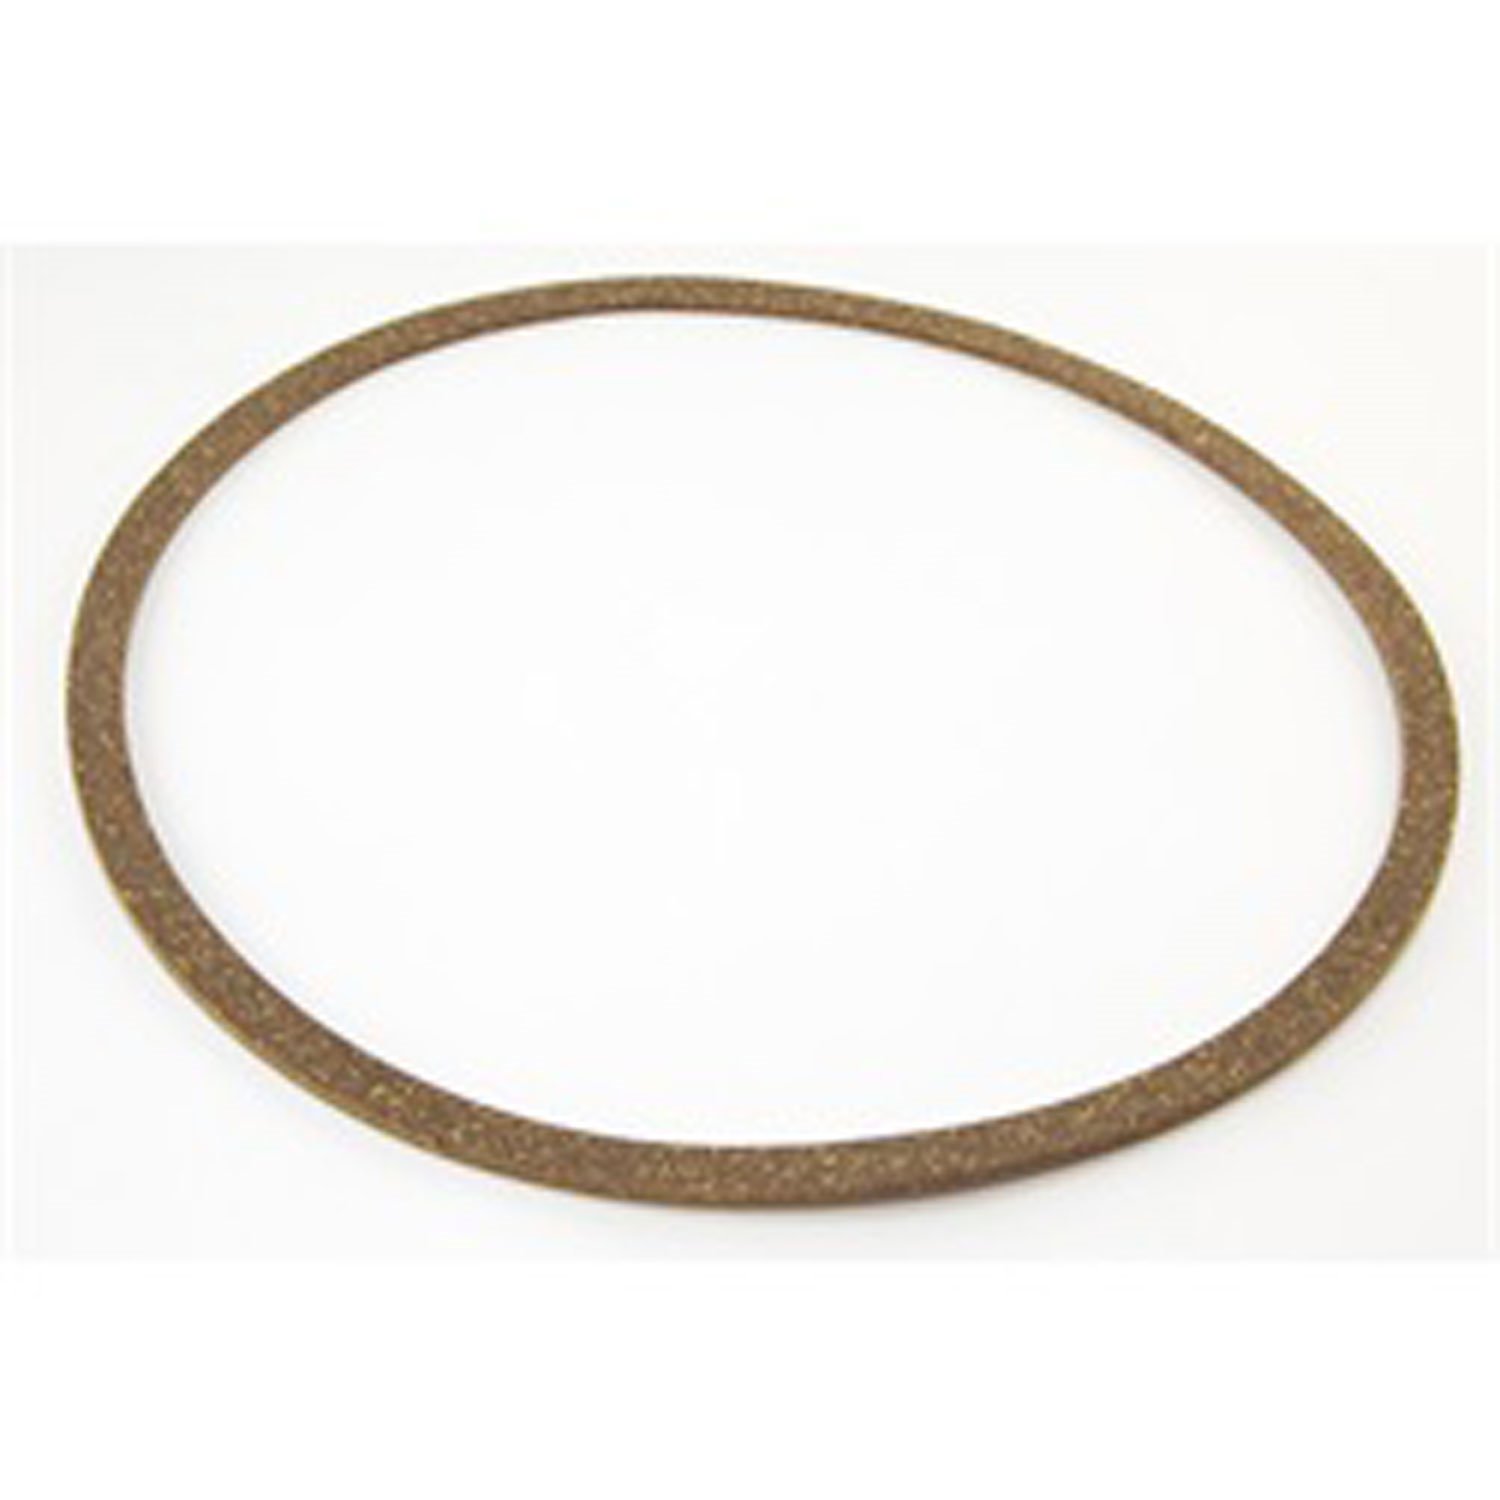 This differential cover gasket fits AMC Model 20 rear axles found in 76-83 Jeep CJ5 76-86 Jeep CJ7 and 81-86 Jeep CJ8.